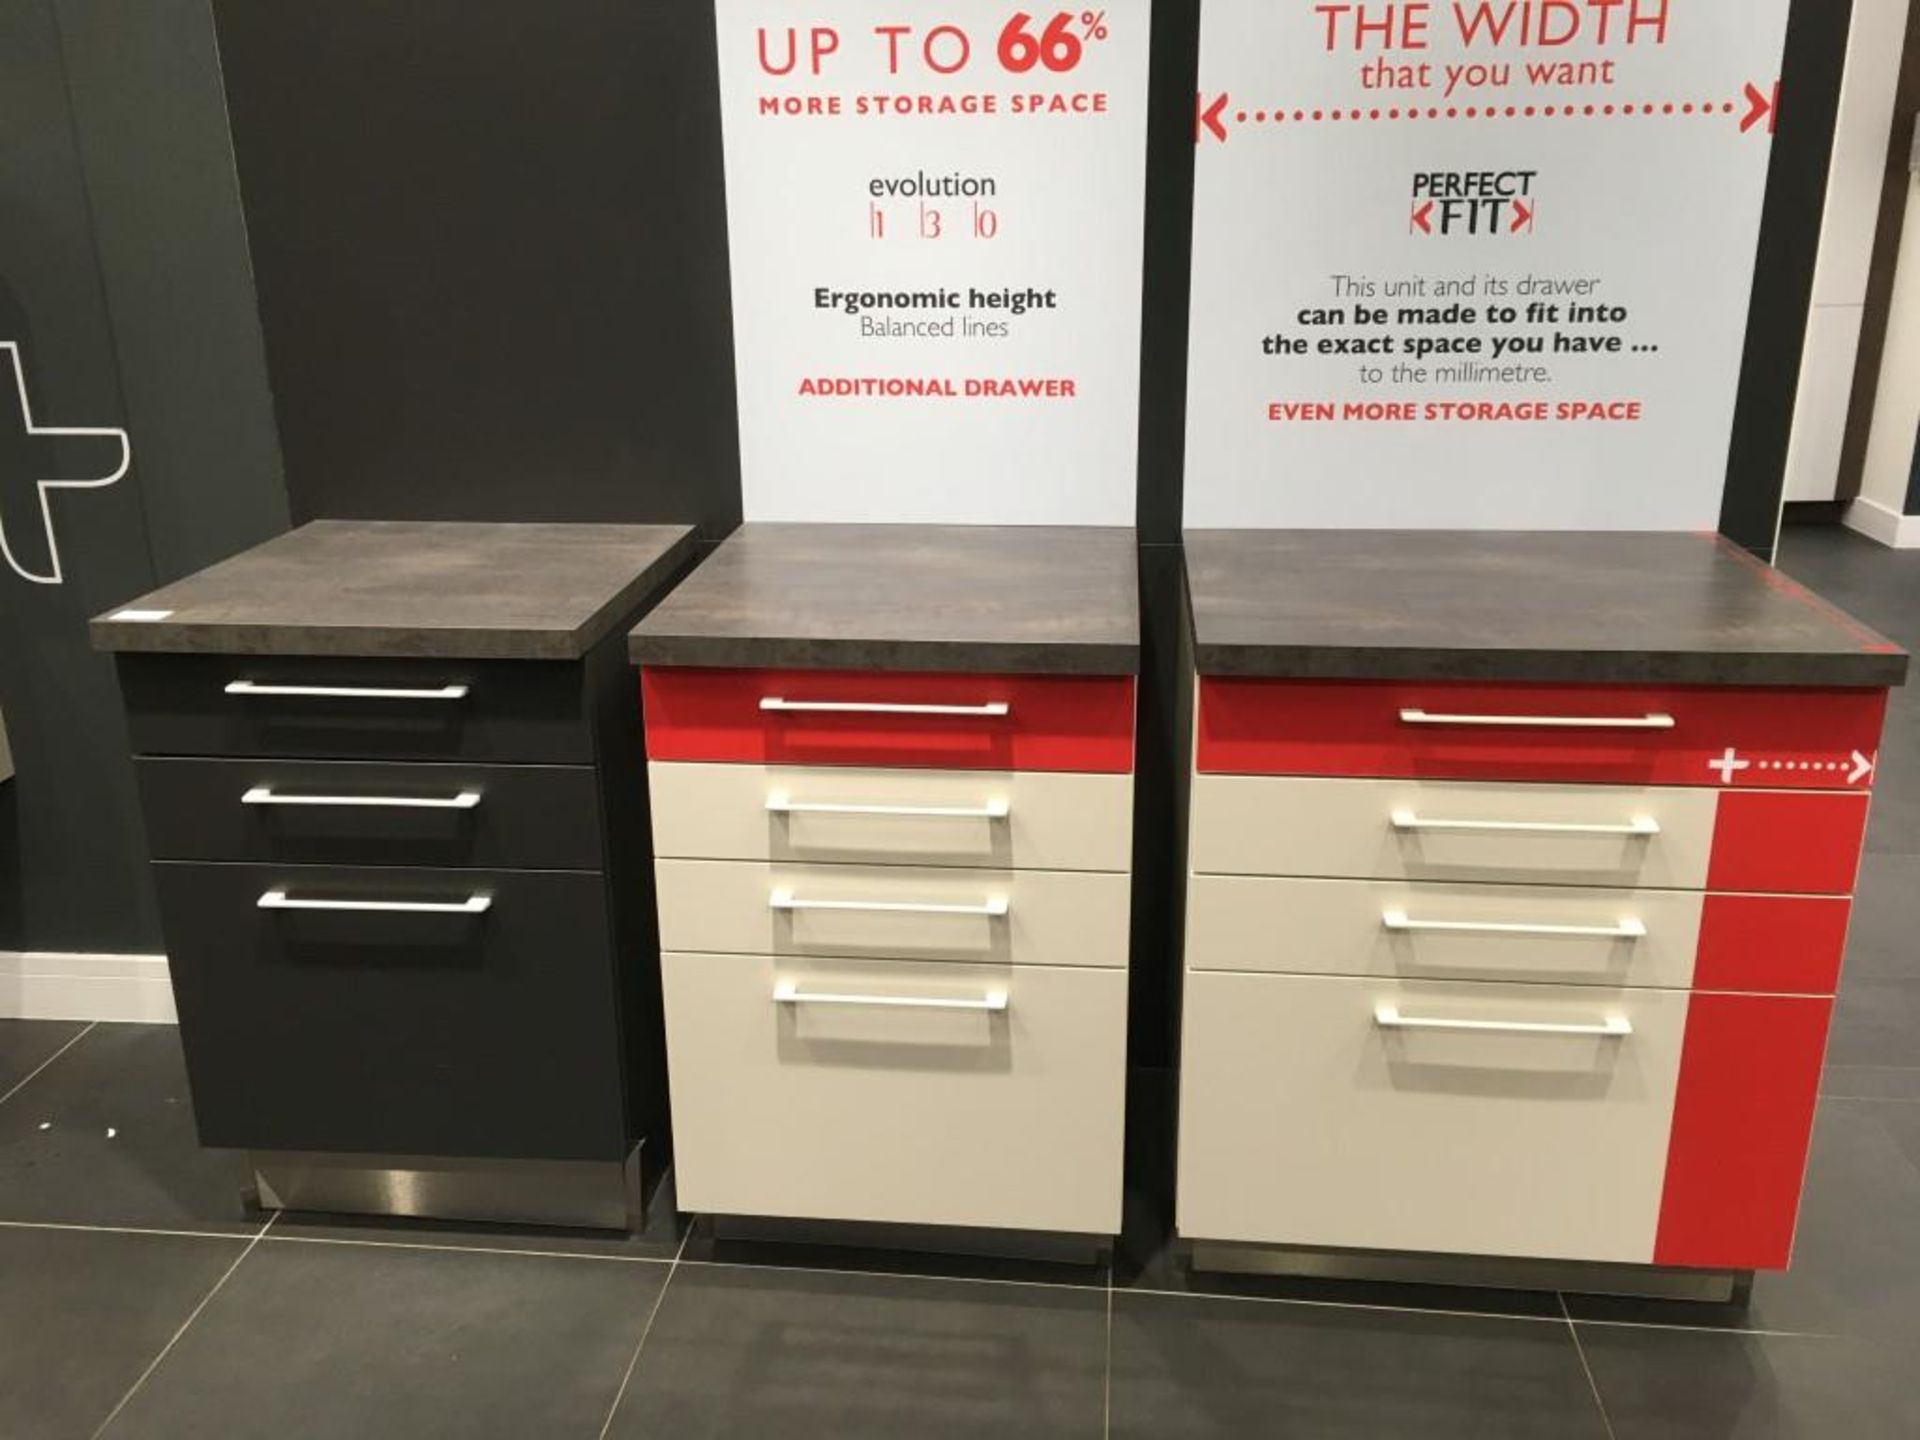 (3) Stand alone drawer units